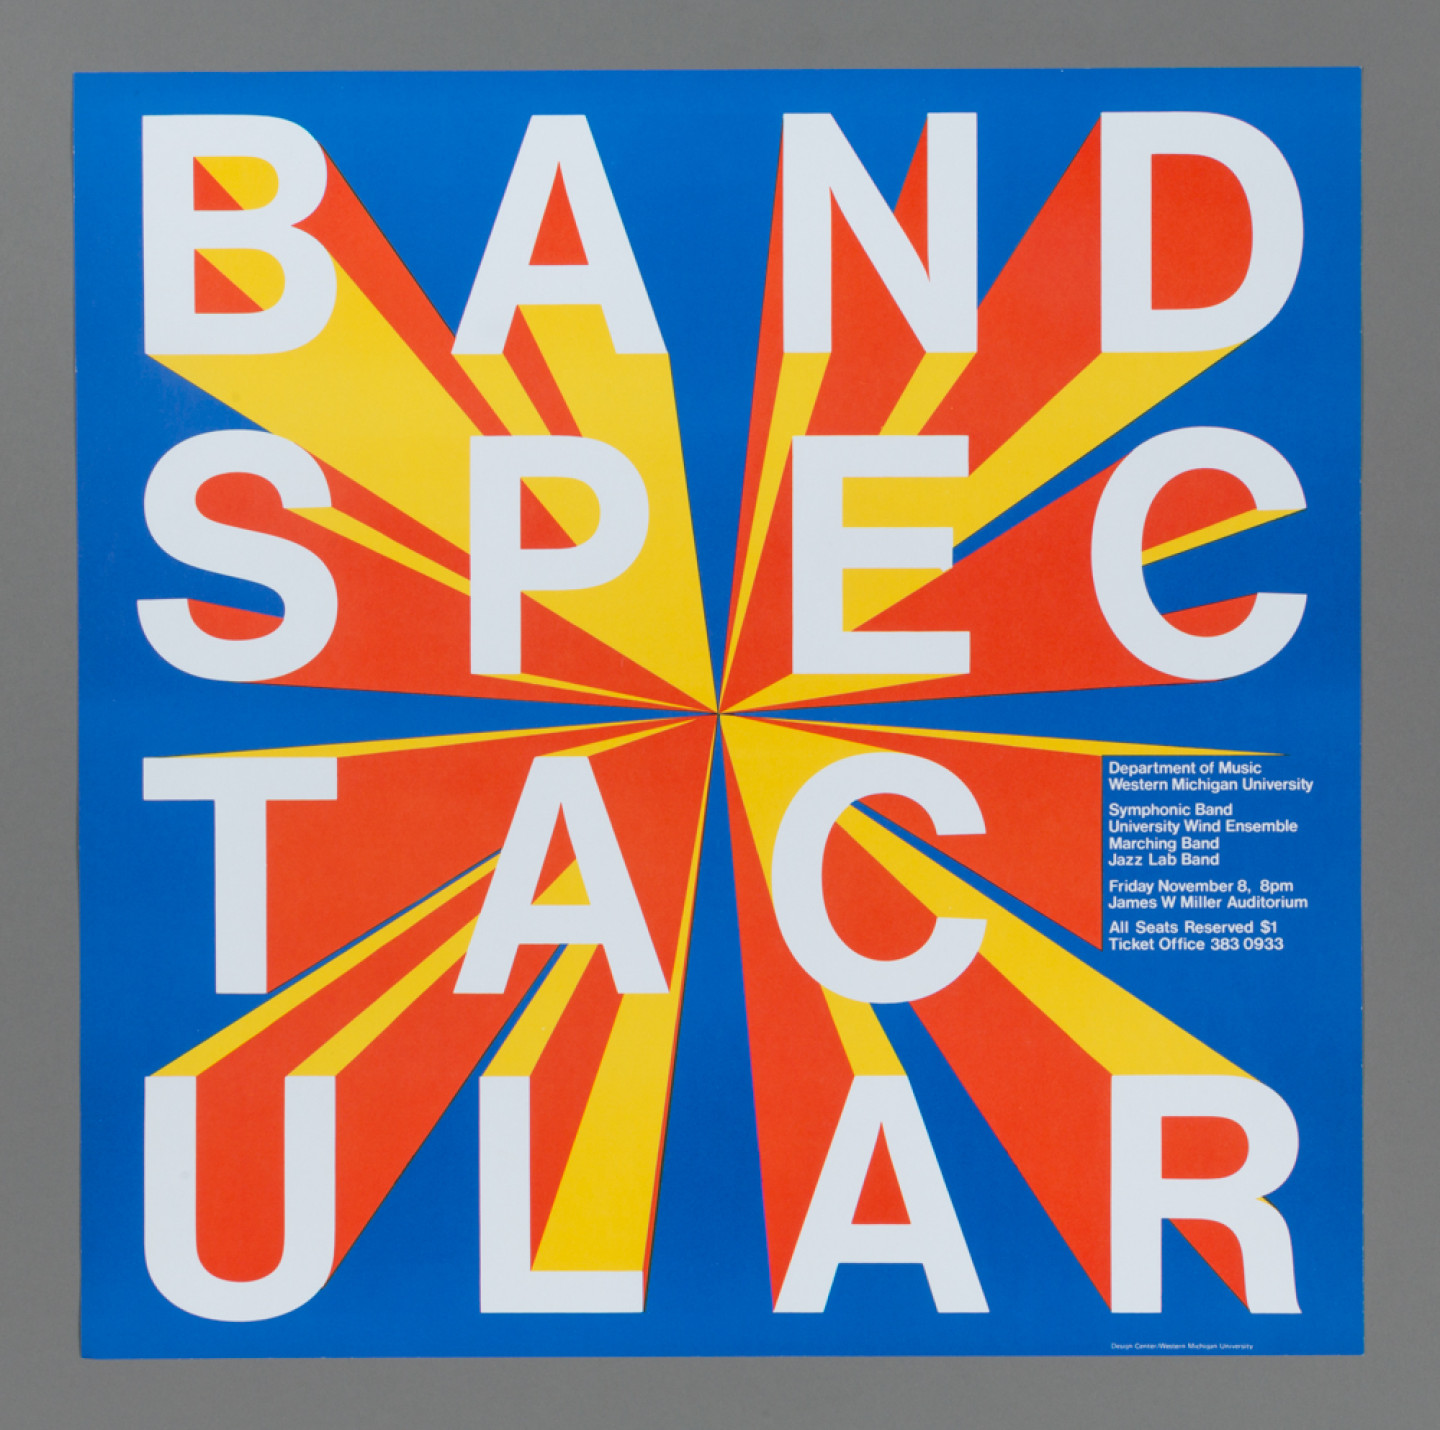 A graphic design that reads, "Band Spectacular."